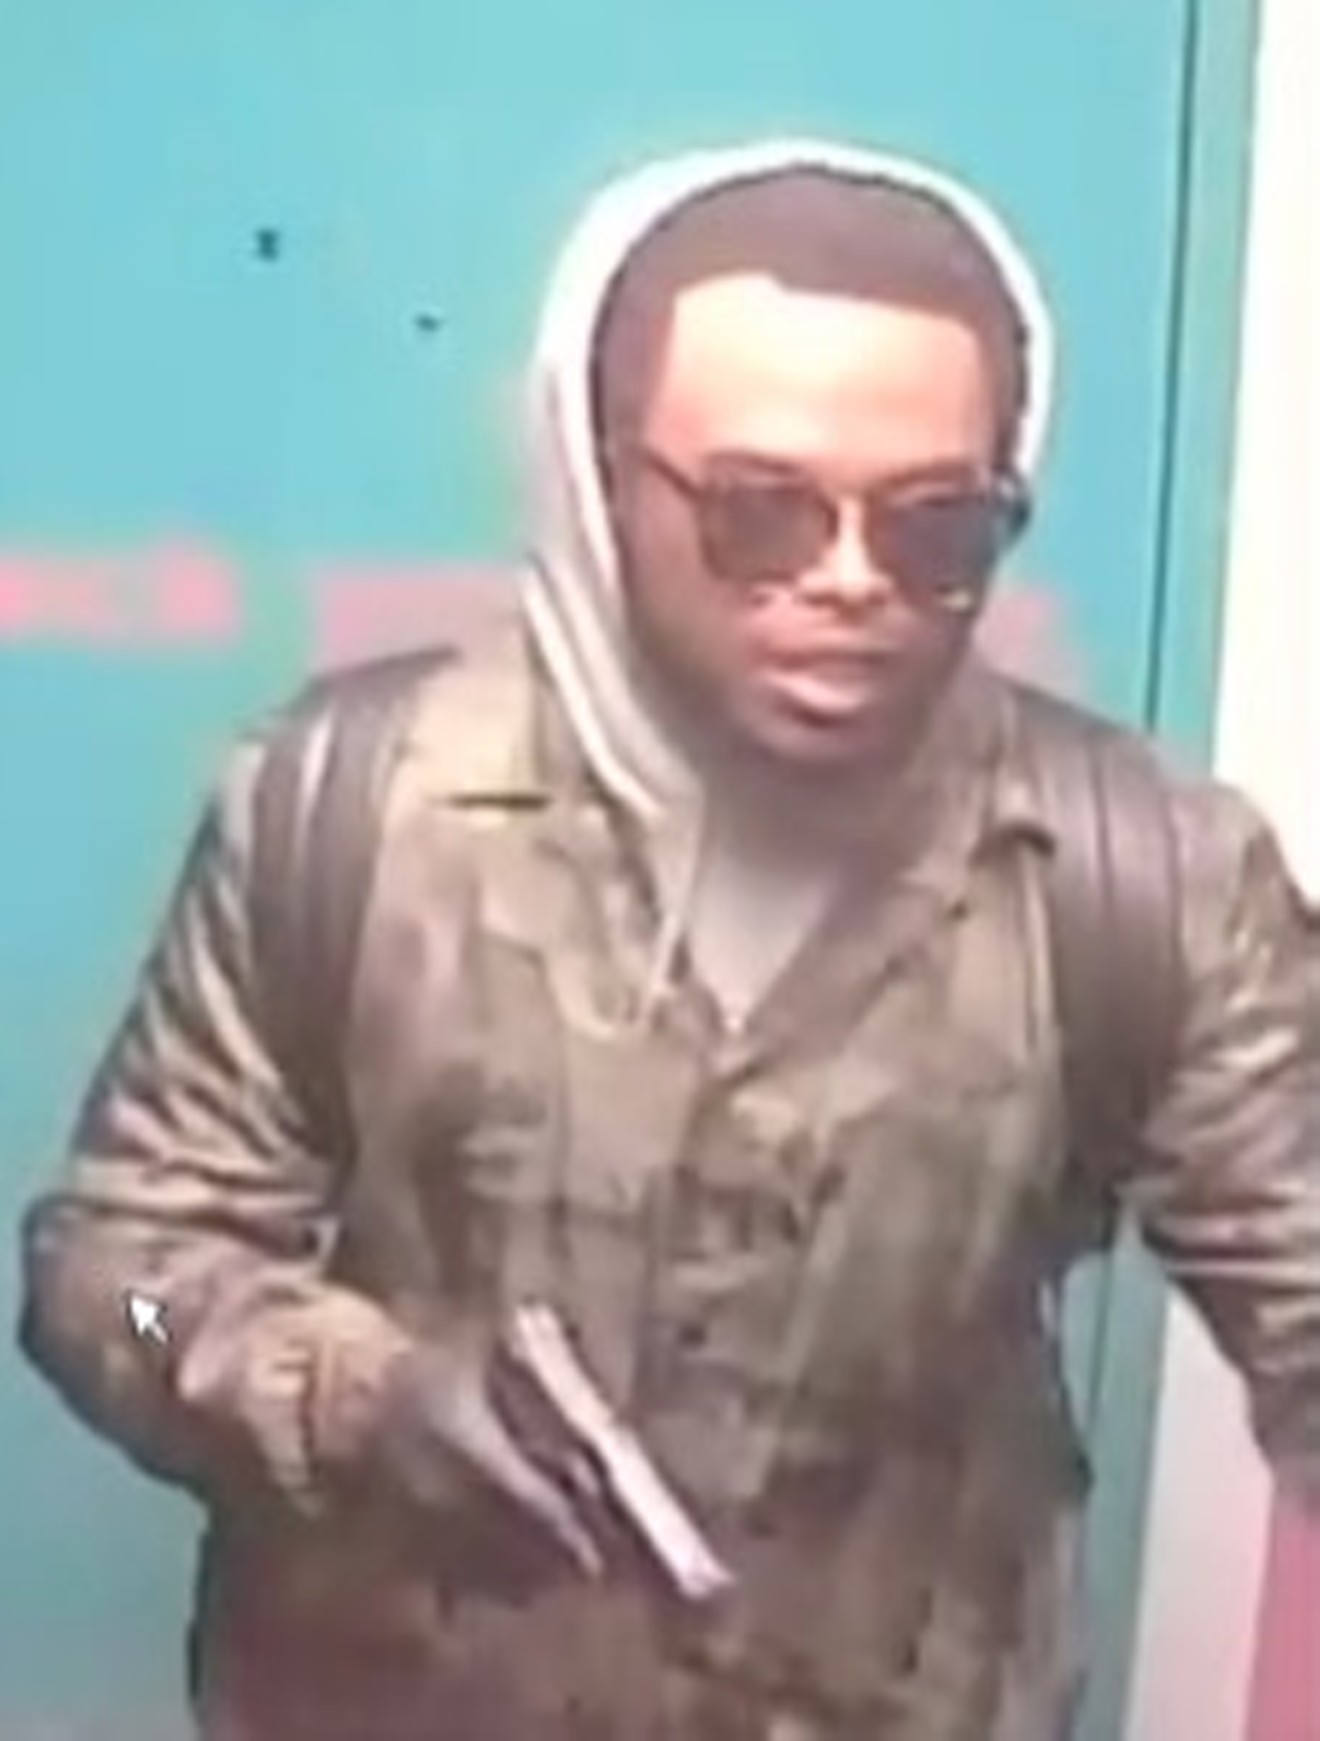 Suspect in the March 26 robbery of Bloom dispensary in Phoenix.